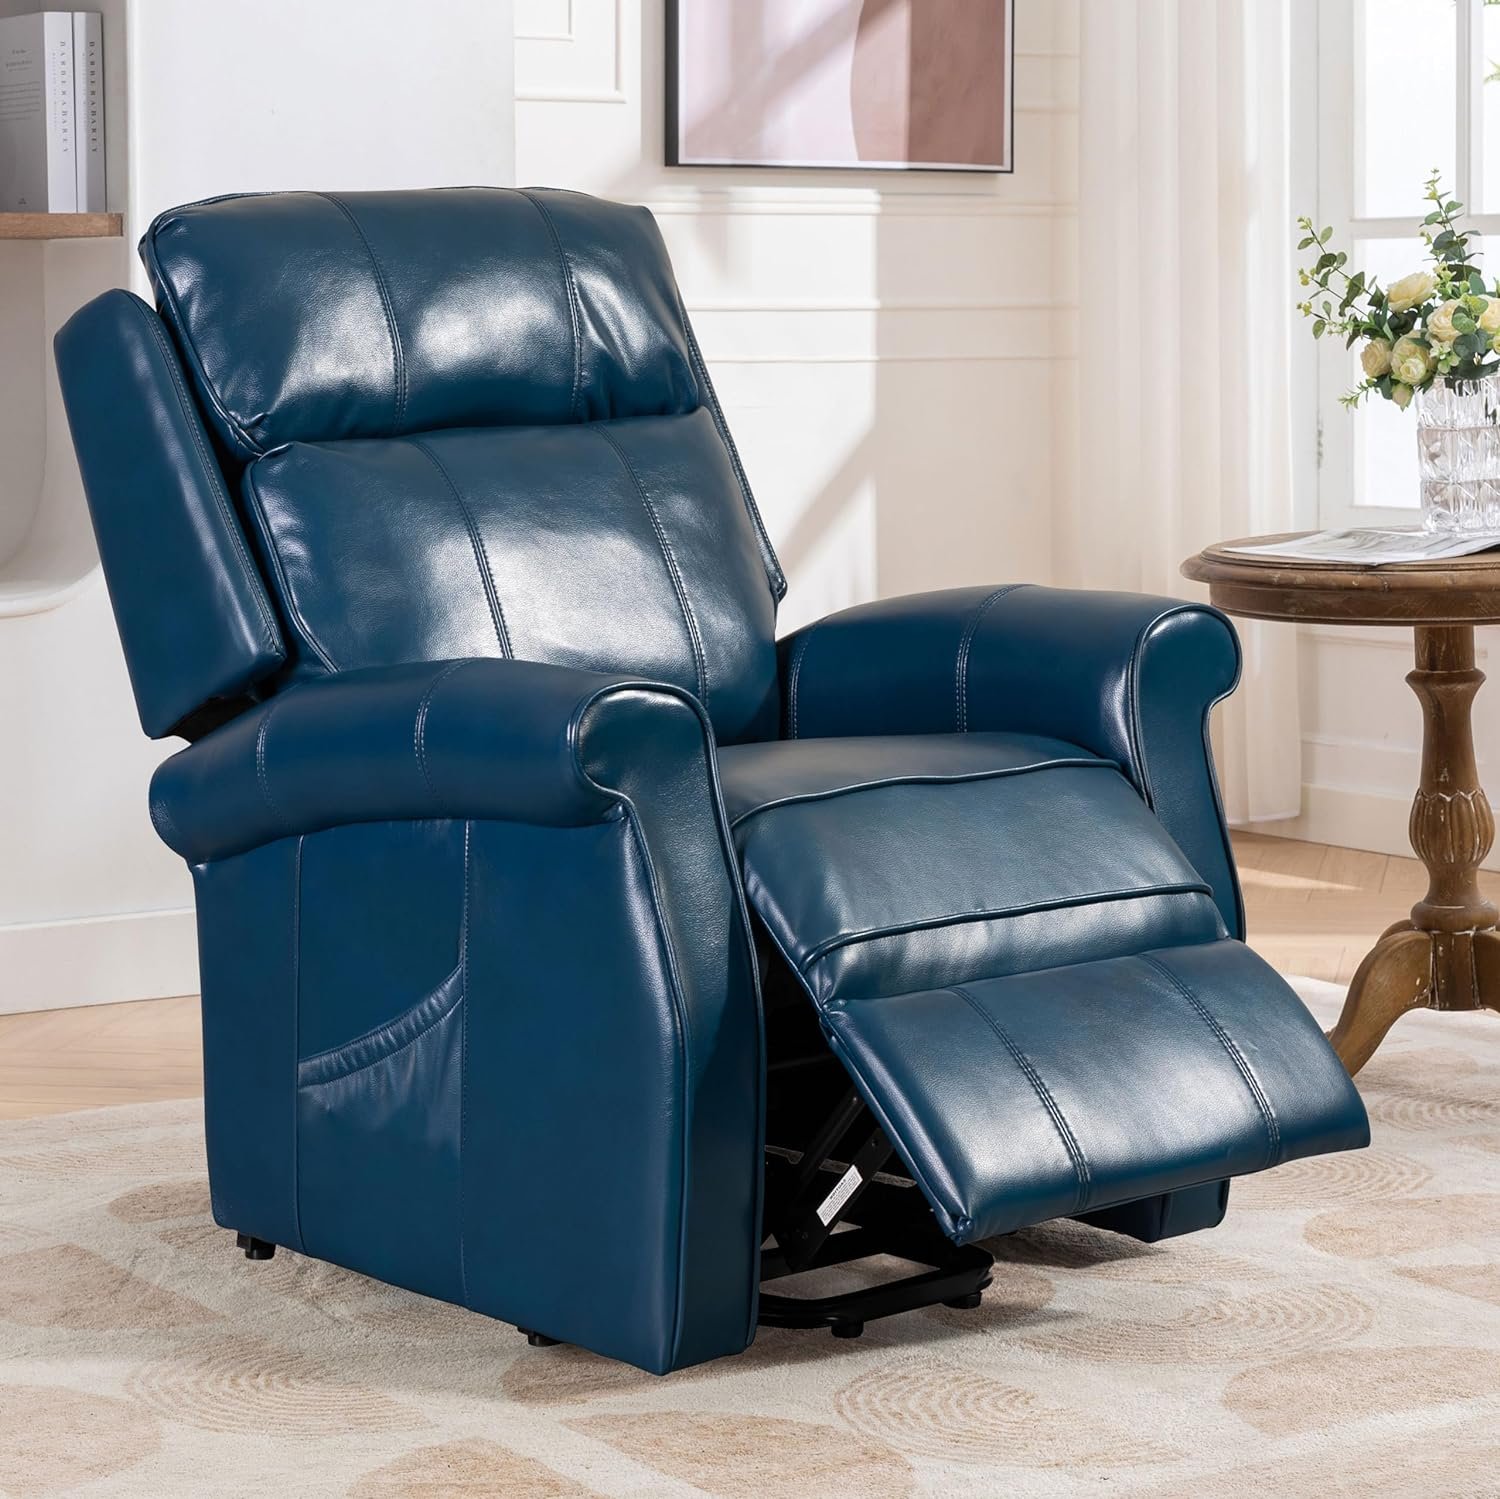 Lehboson Lift Chair Recliners, Electric Power Lift Chairs Recliners for Elderly with Massage,Faux Leather Lazy Recliner for Living Room,3 Positions,USB Ports and Side Pocket (Navy Blue)